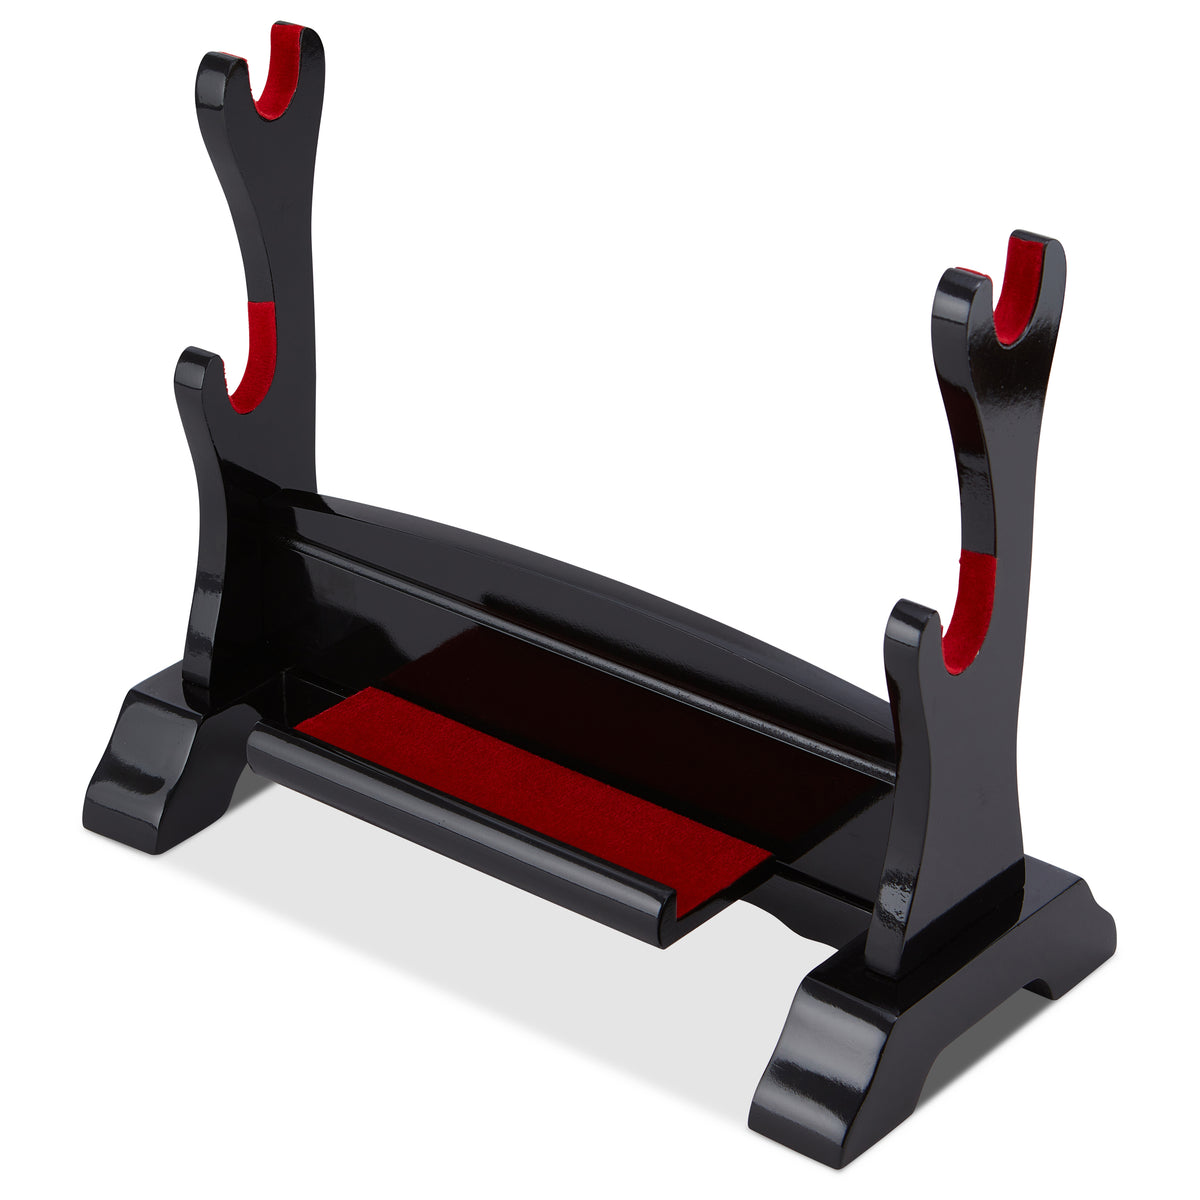 Double or Two Tiered Sword Display Stand made of Black Lacquered Wood and Red Felt